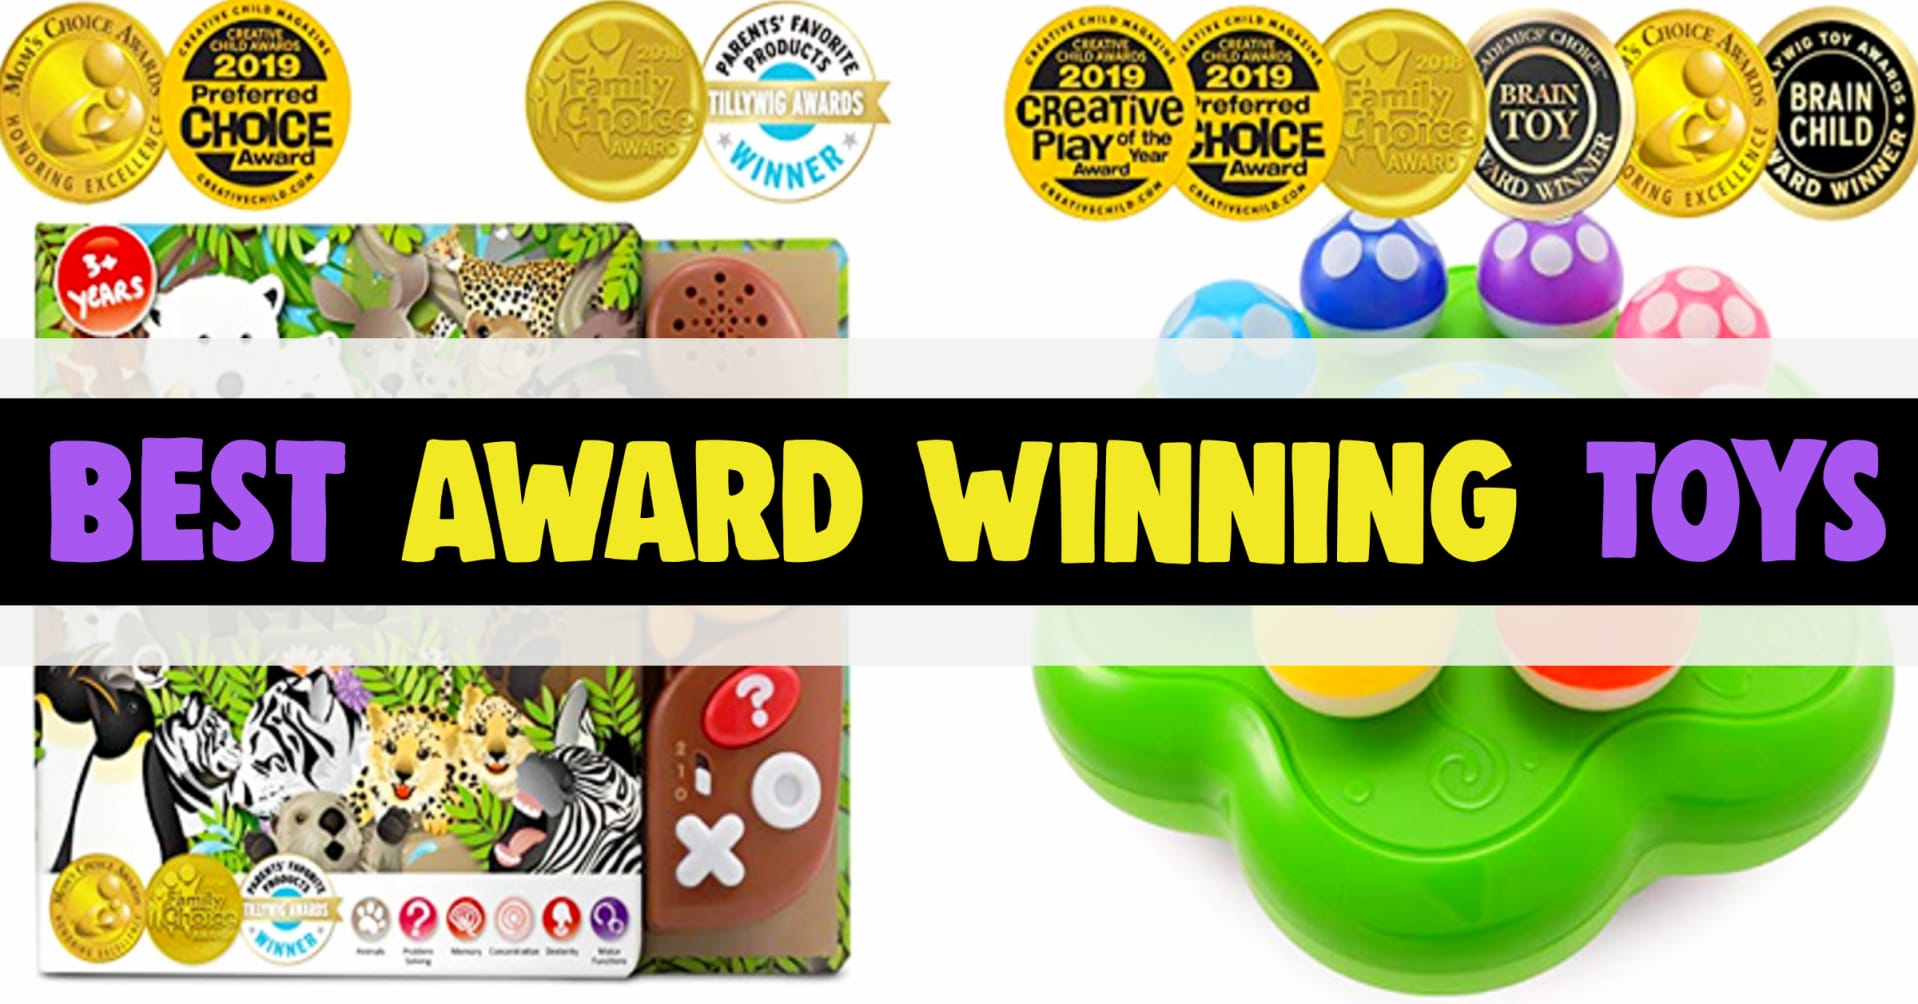 Award Winning Toys!  Best award winning toys and toy awards 2022 for 1 years olds, 2 years olds, 3 year olds and all toddler boys and girls.  Toy of the Year awards!